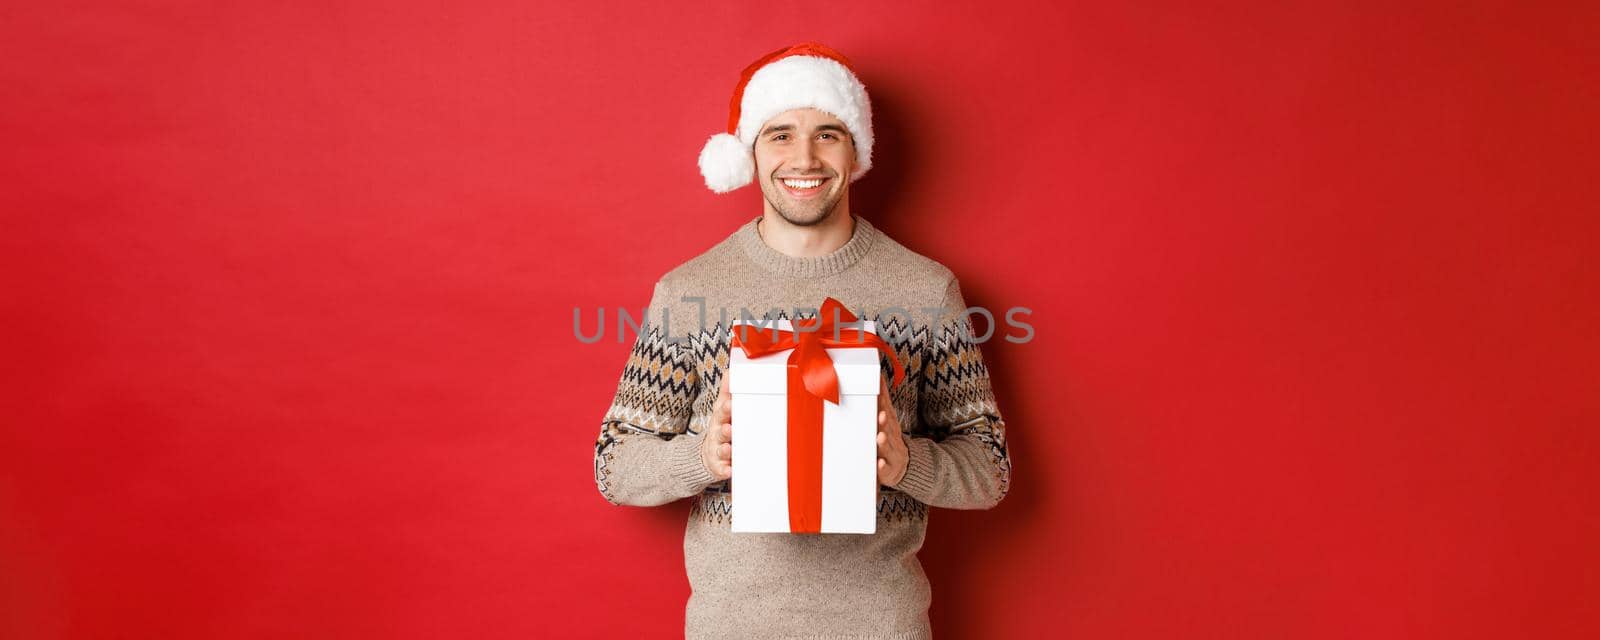 Image of handsome smiling man in santa hat and winter sweater, holding a present, giving christmas gift and wishing happy holidays, standing over red background.